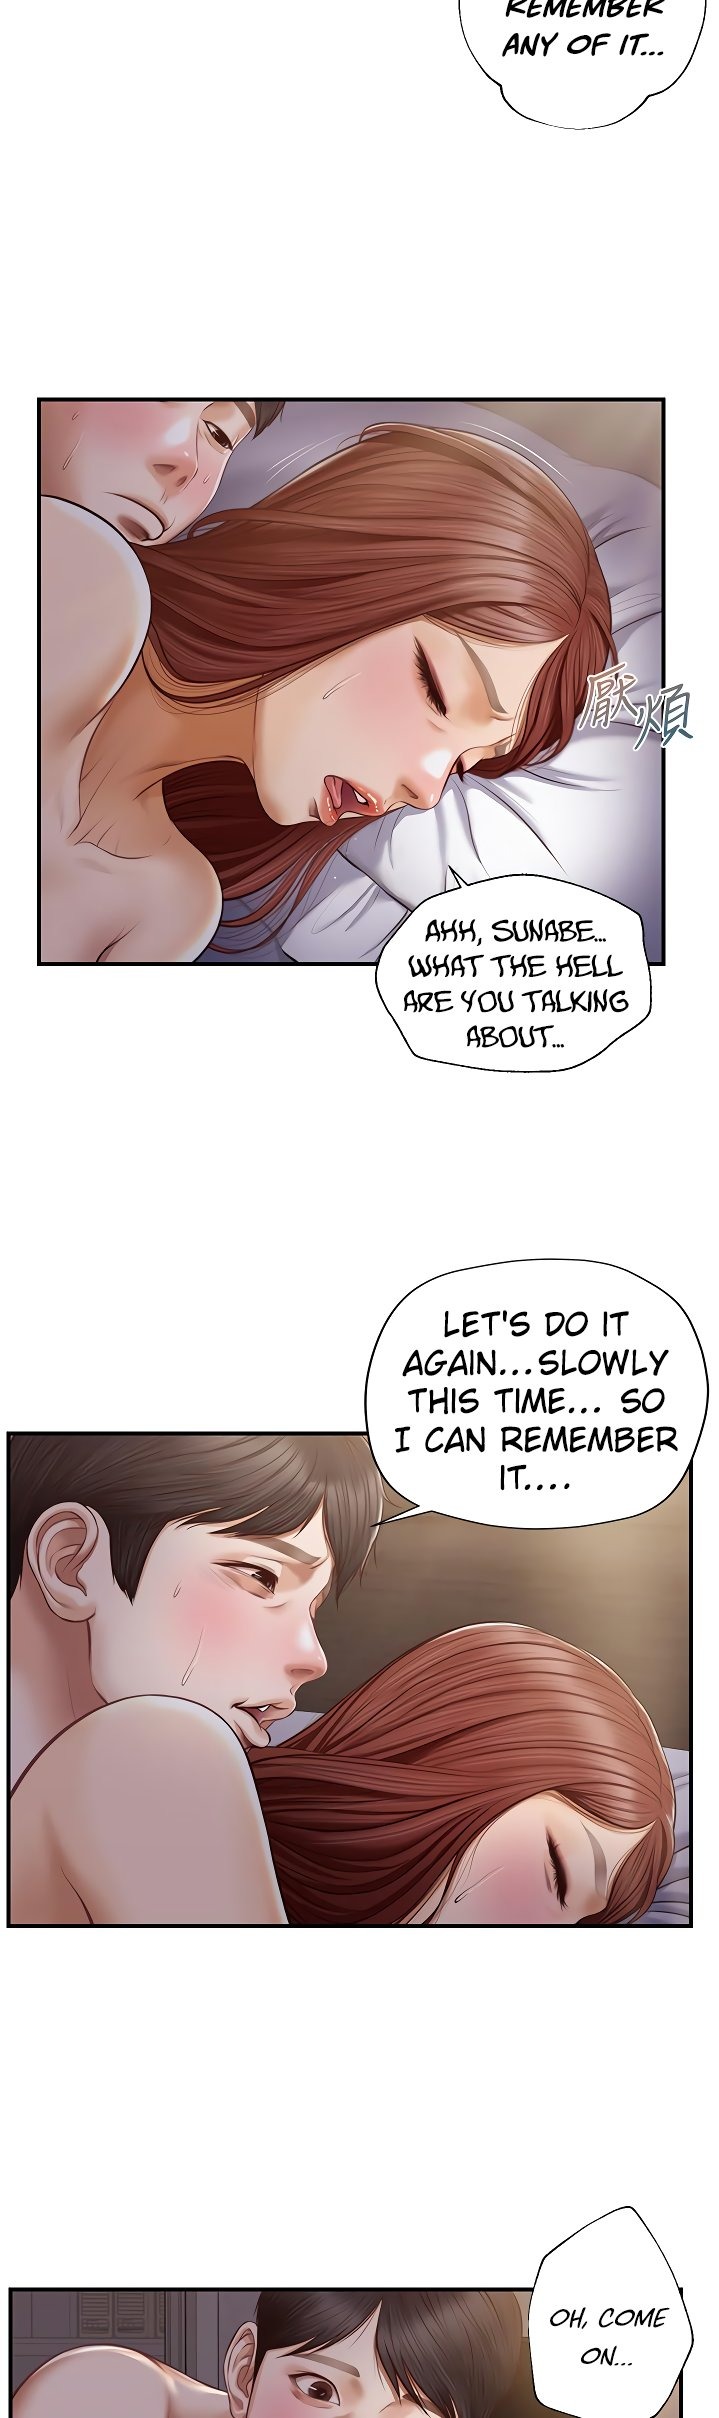 Age of Innocence Chapter 8 - Page 11